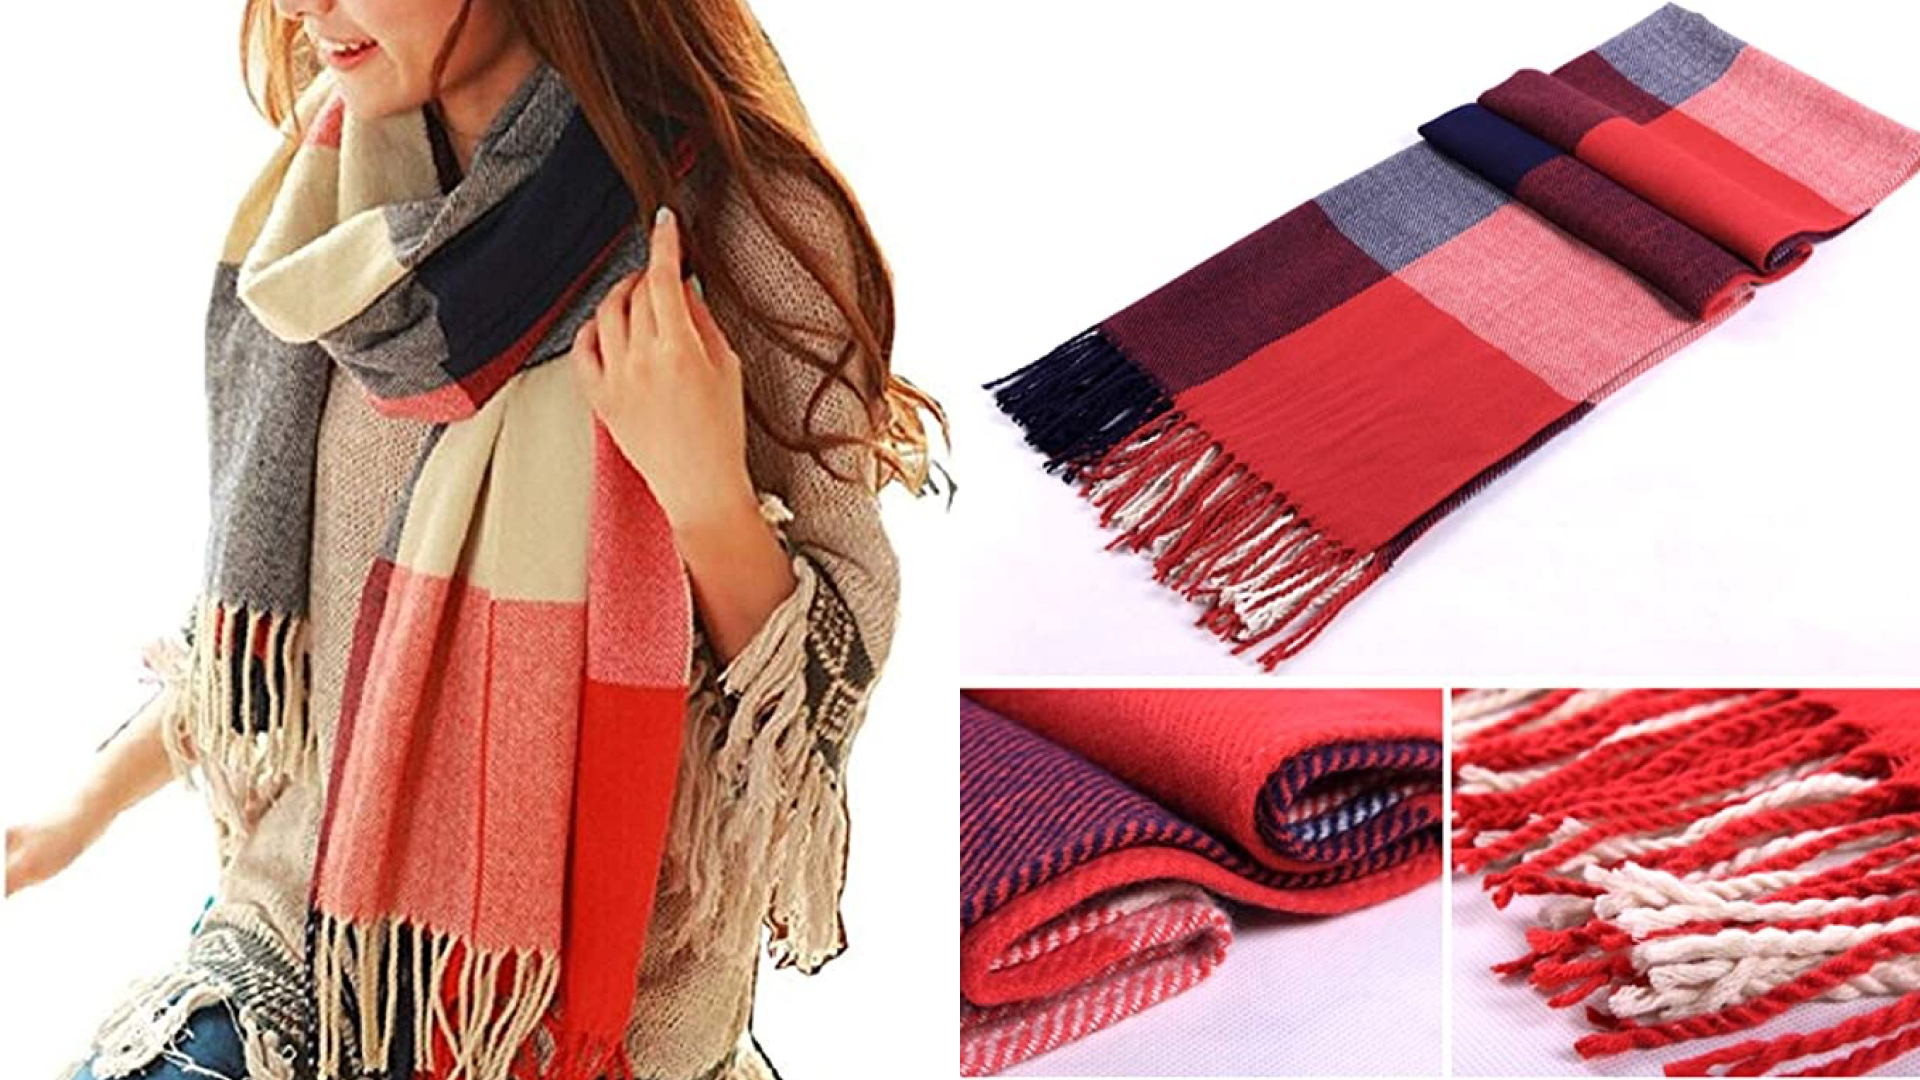 Scarf Every Winter Options | Warm Aesthetic theSkimm Snood for and